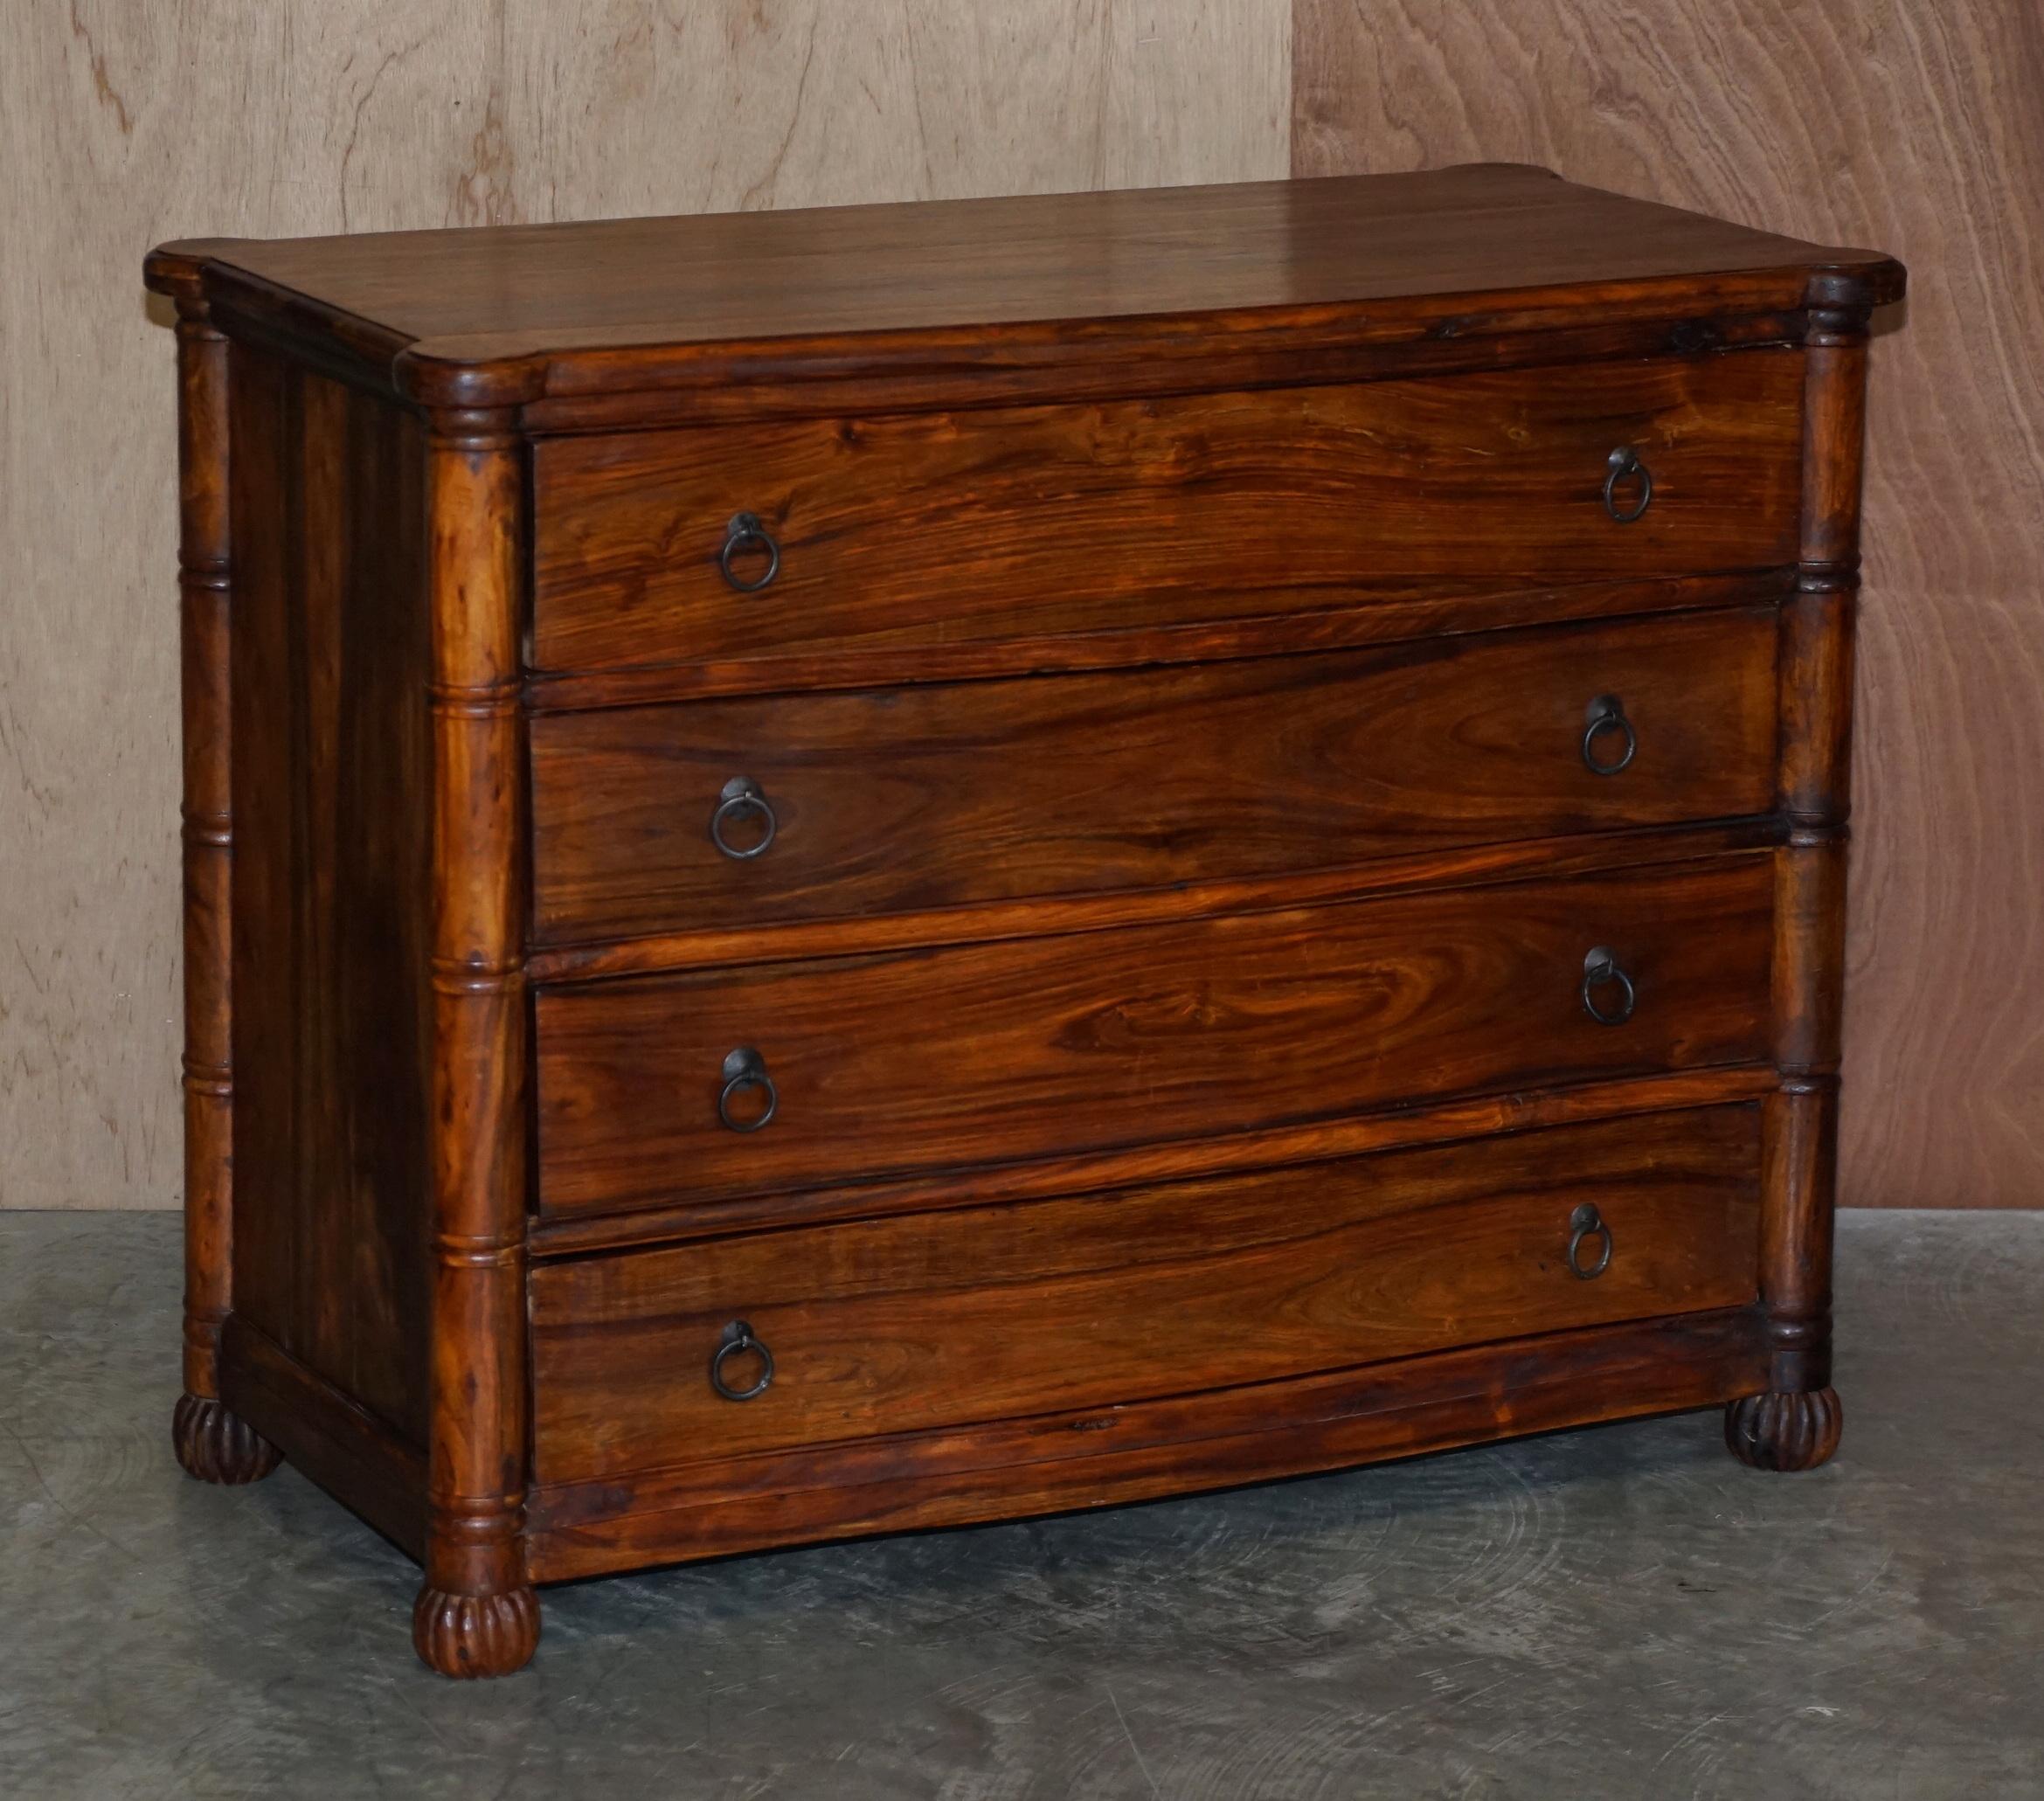 We are delighted to offer for sale this sublime pair of decorative hardwood serpentine fronted chests of drawers based on an early Georgian design

These are a nicely size pair, they offer huge amount of storage, they are made in some kind of